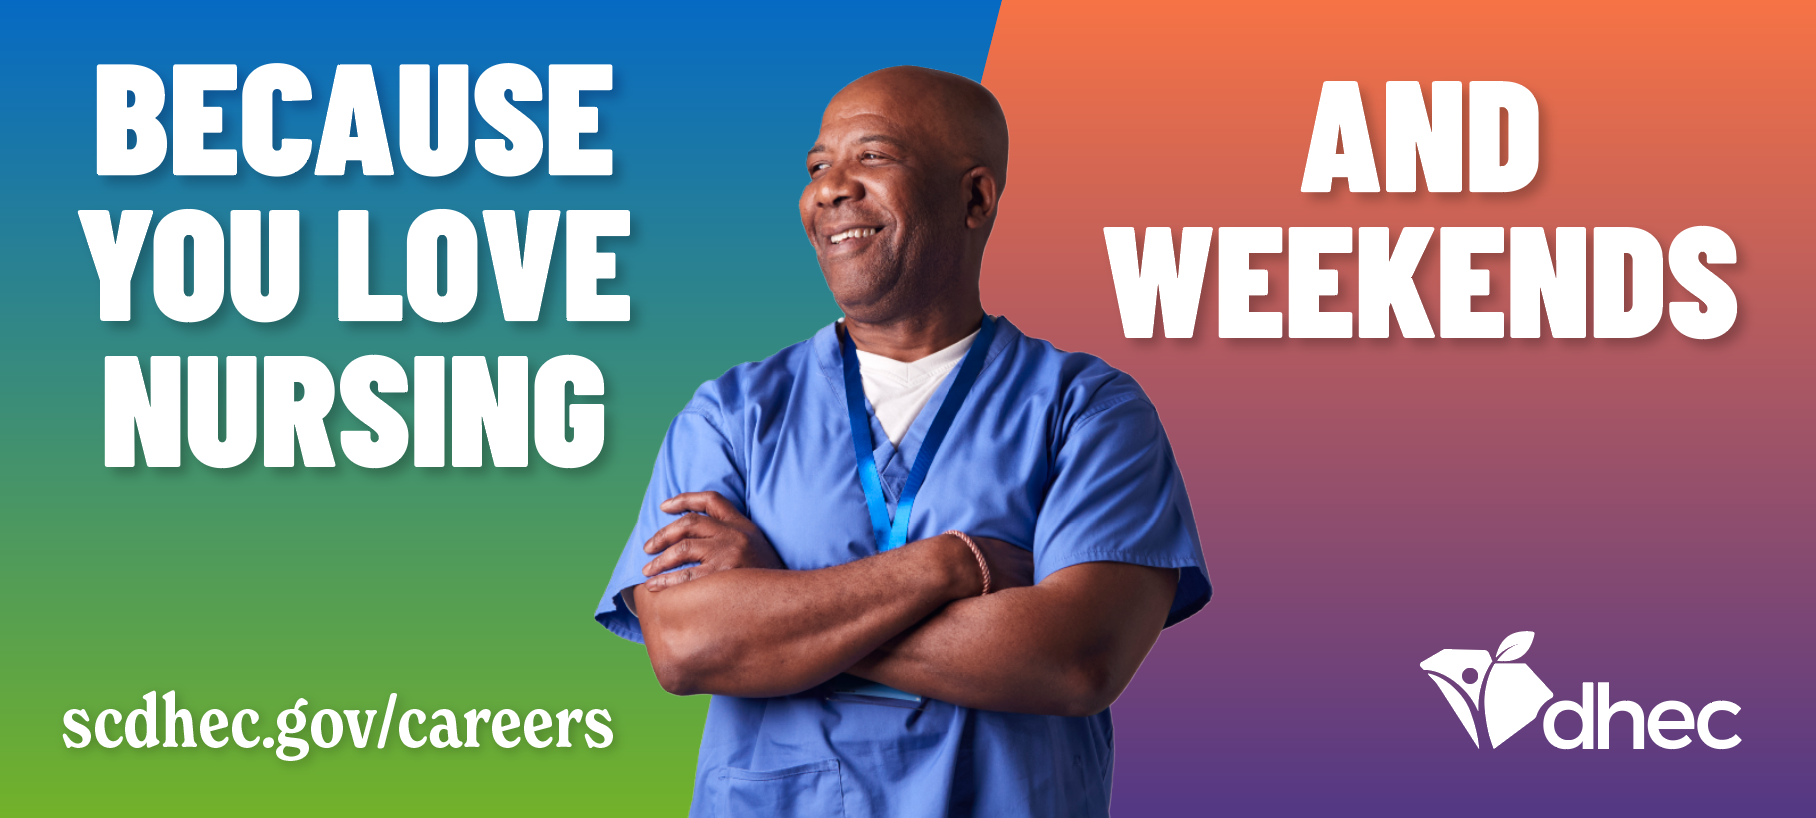 "Because You Love Nursing and Weekends" wording with image of nurse